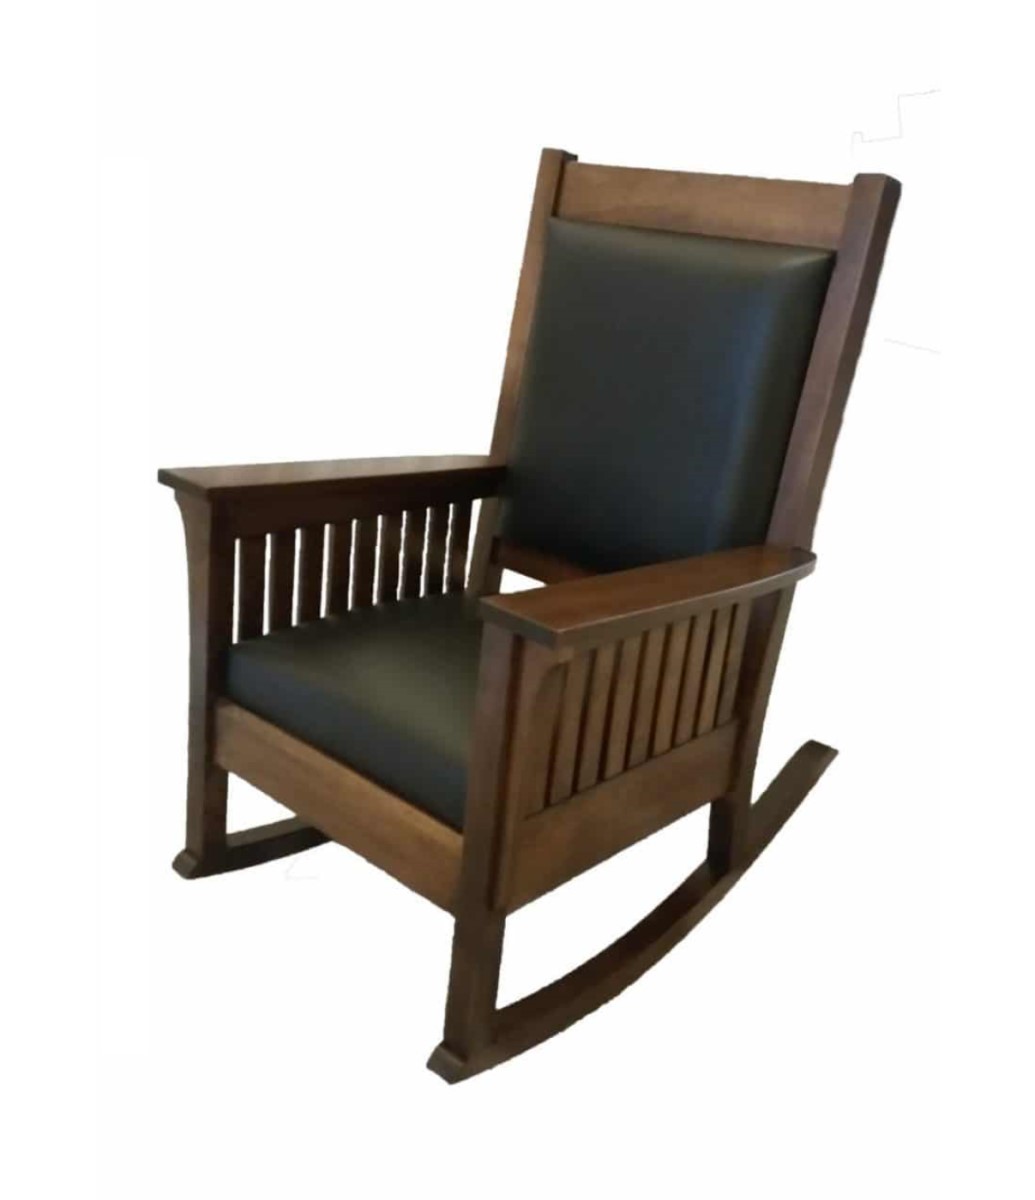 Affinity Mission Rocking Chair Amrc, Antique Rocking Chair With Leather Seat